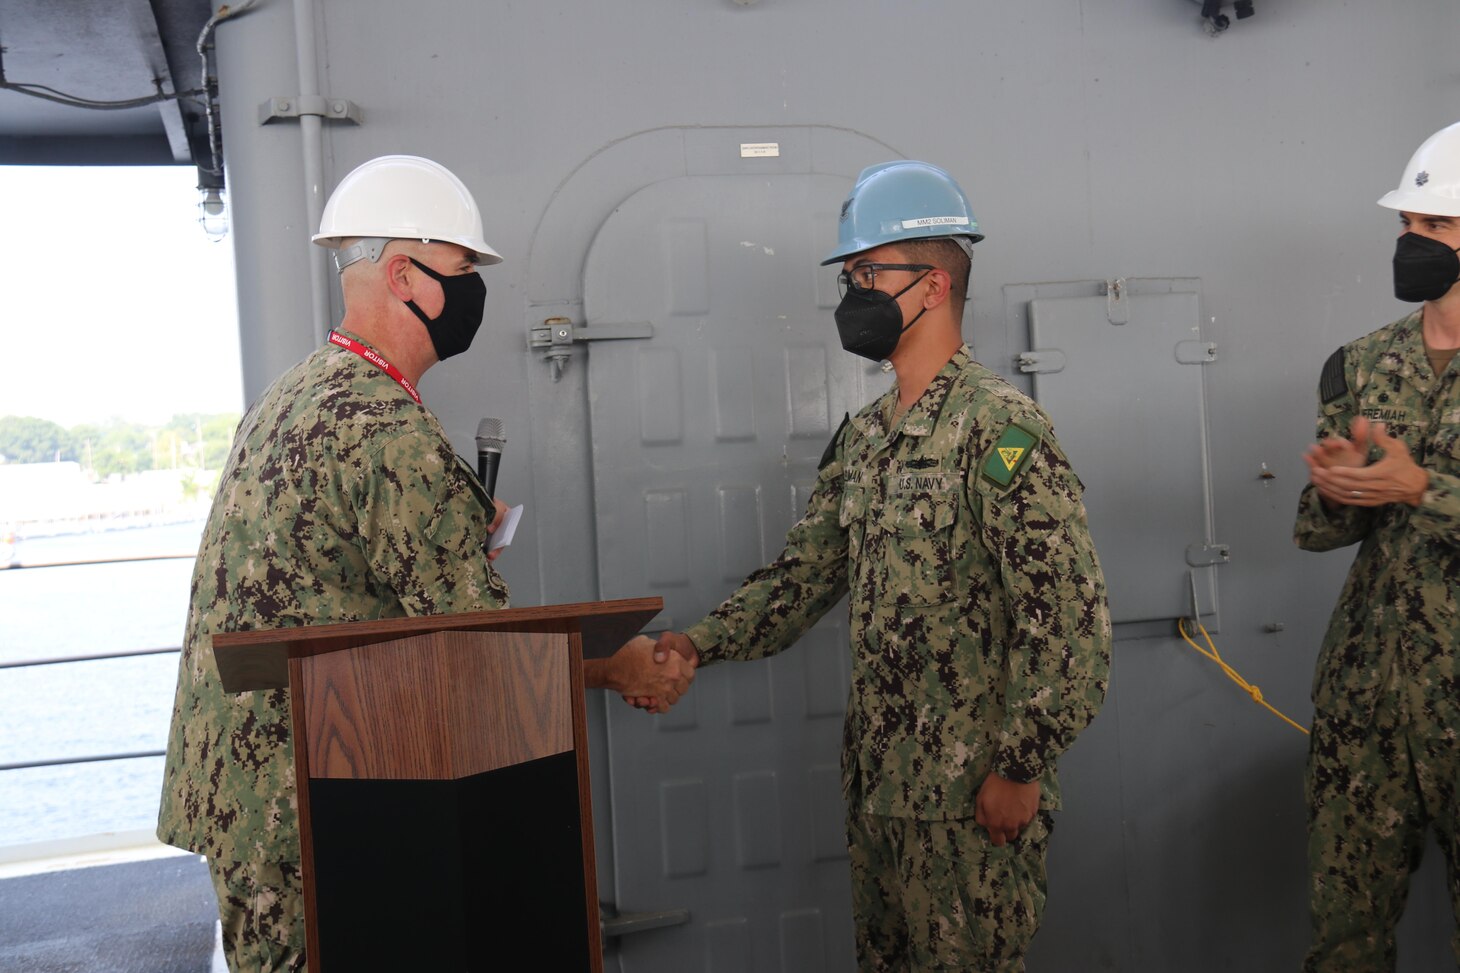 Rear Adm. Brendan McLane, left, commander, Naval Surface Force Atlantic, shakes hands with Machinist’s Mate 2nd Class John Henry Soliman before presenting the Navy Unit Commendation to the crew of the guided-missile destroyer USS James E. Williams (DDG 95). James E. Williams received the award for its 2020 deployment to the U.S. 5th and 6th Fleet areas of operation. (U.S. Navy photo by Logistics Specialist Seaman Savannah Sellner)